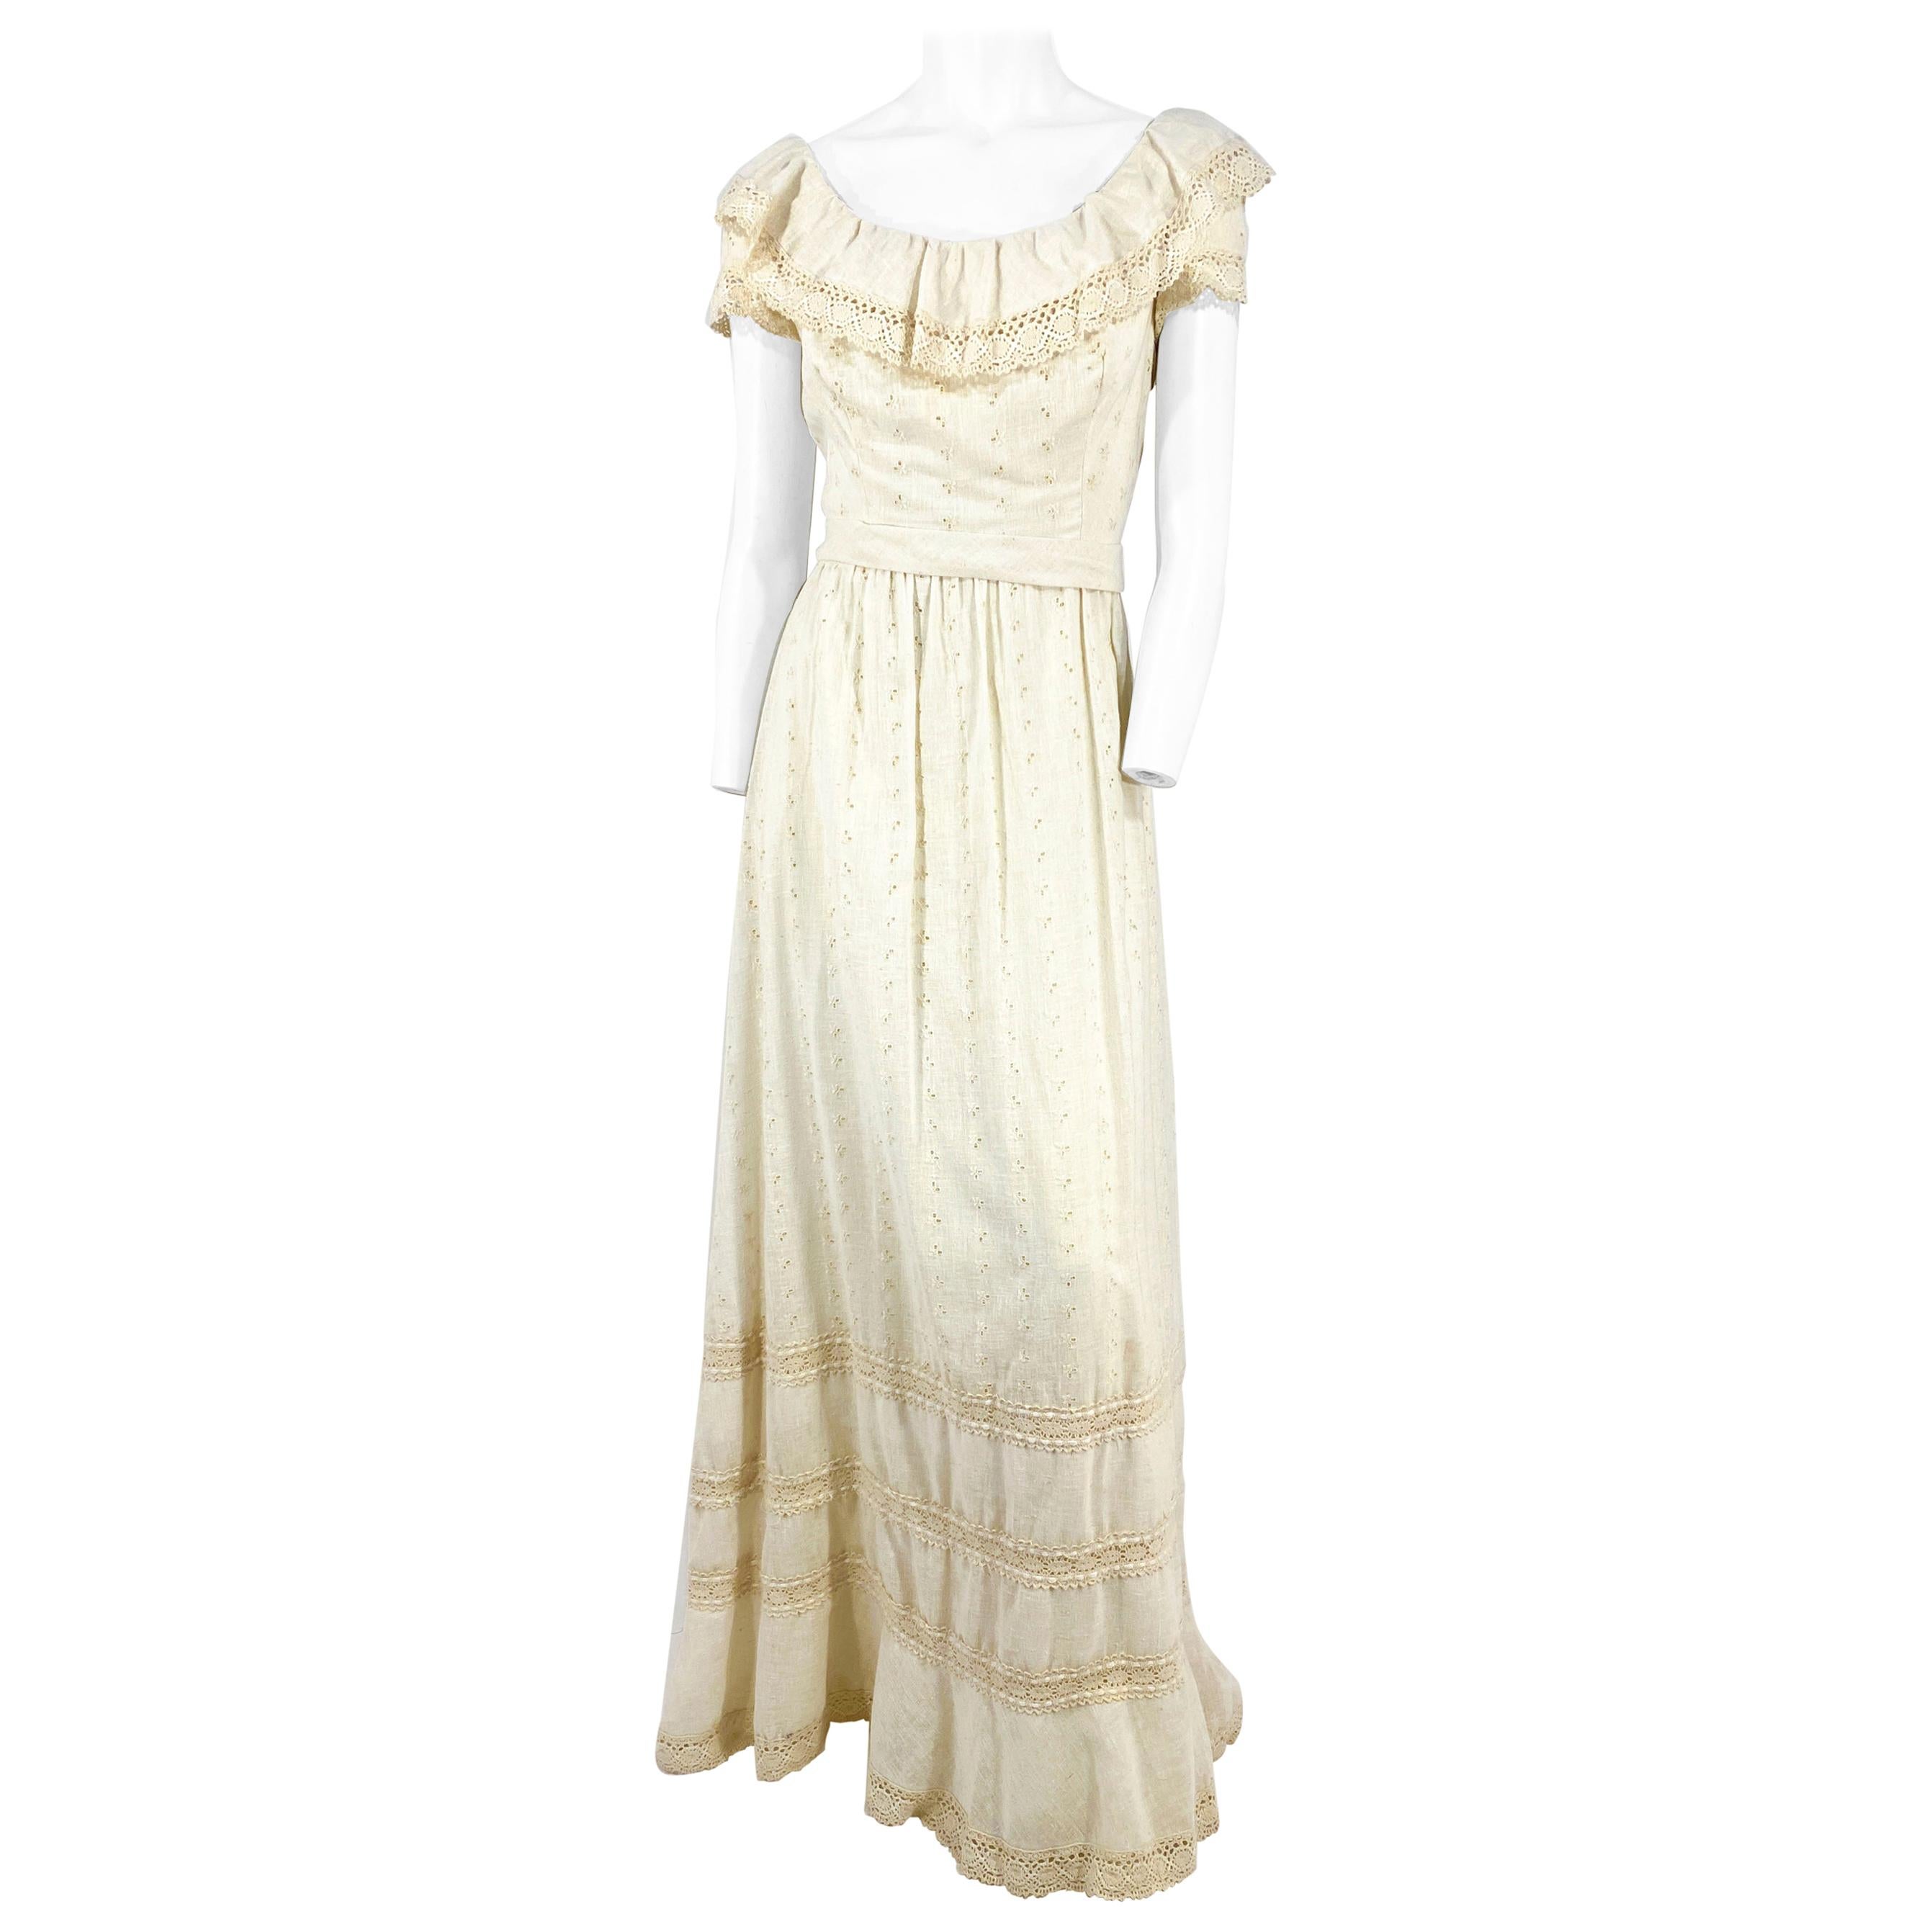 1960s Cotton Full-Length Dress with Crochet Trim For Sale